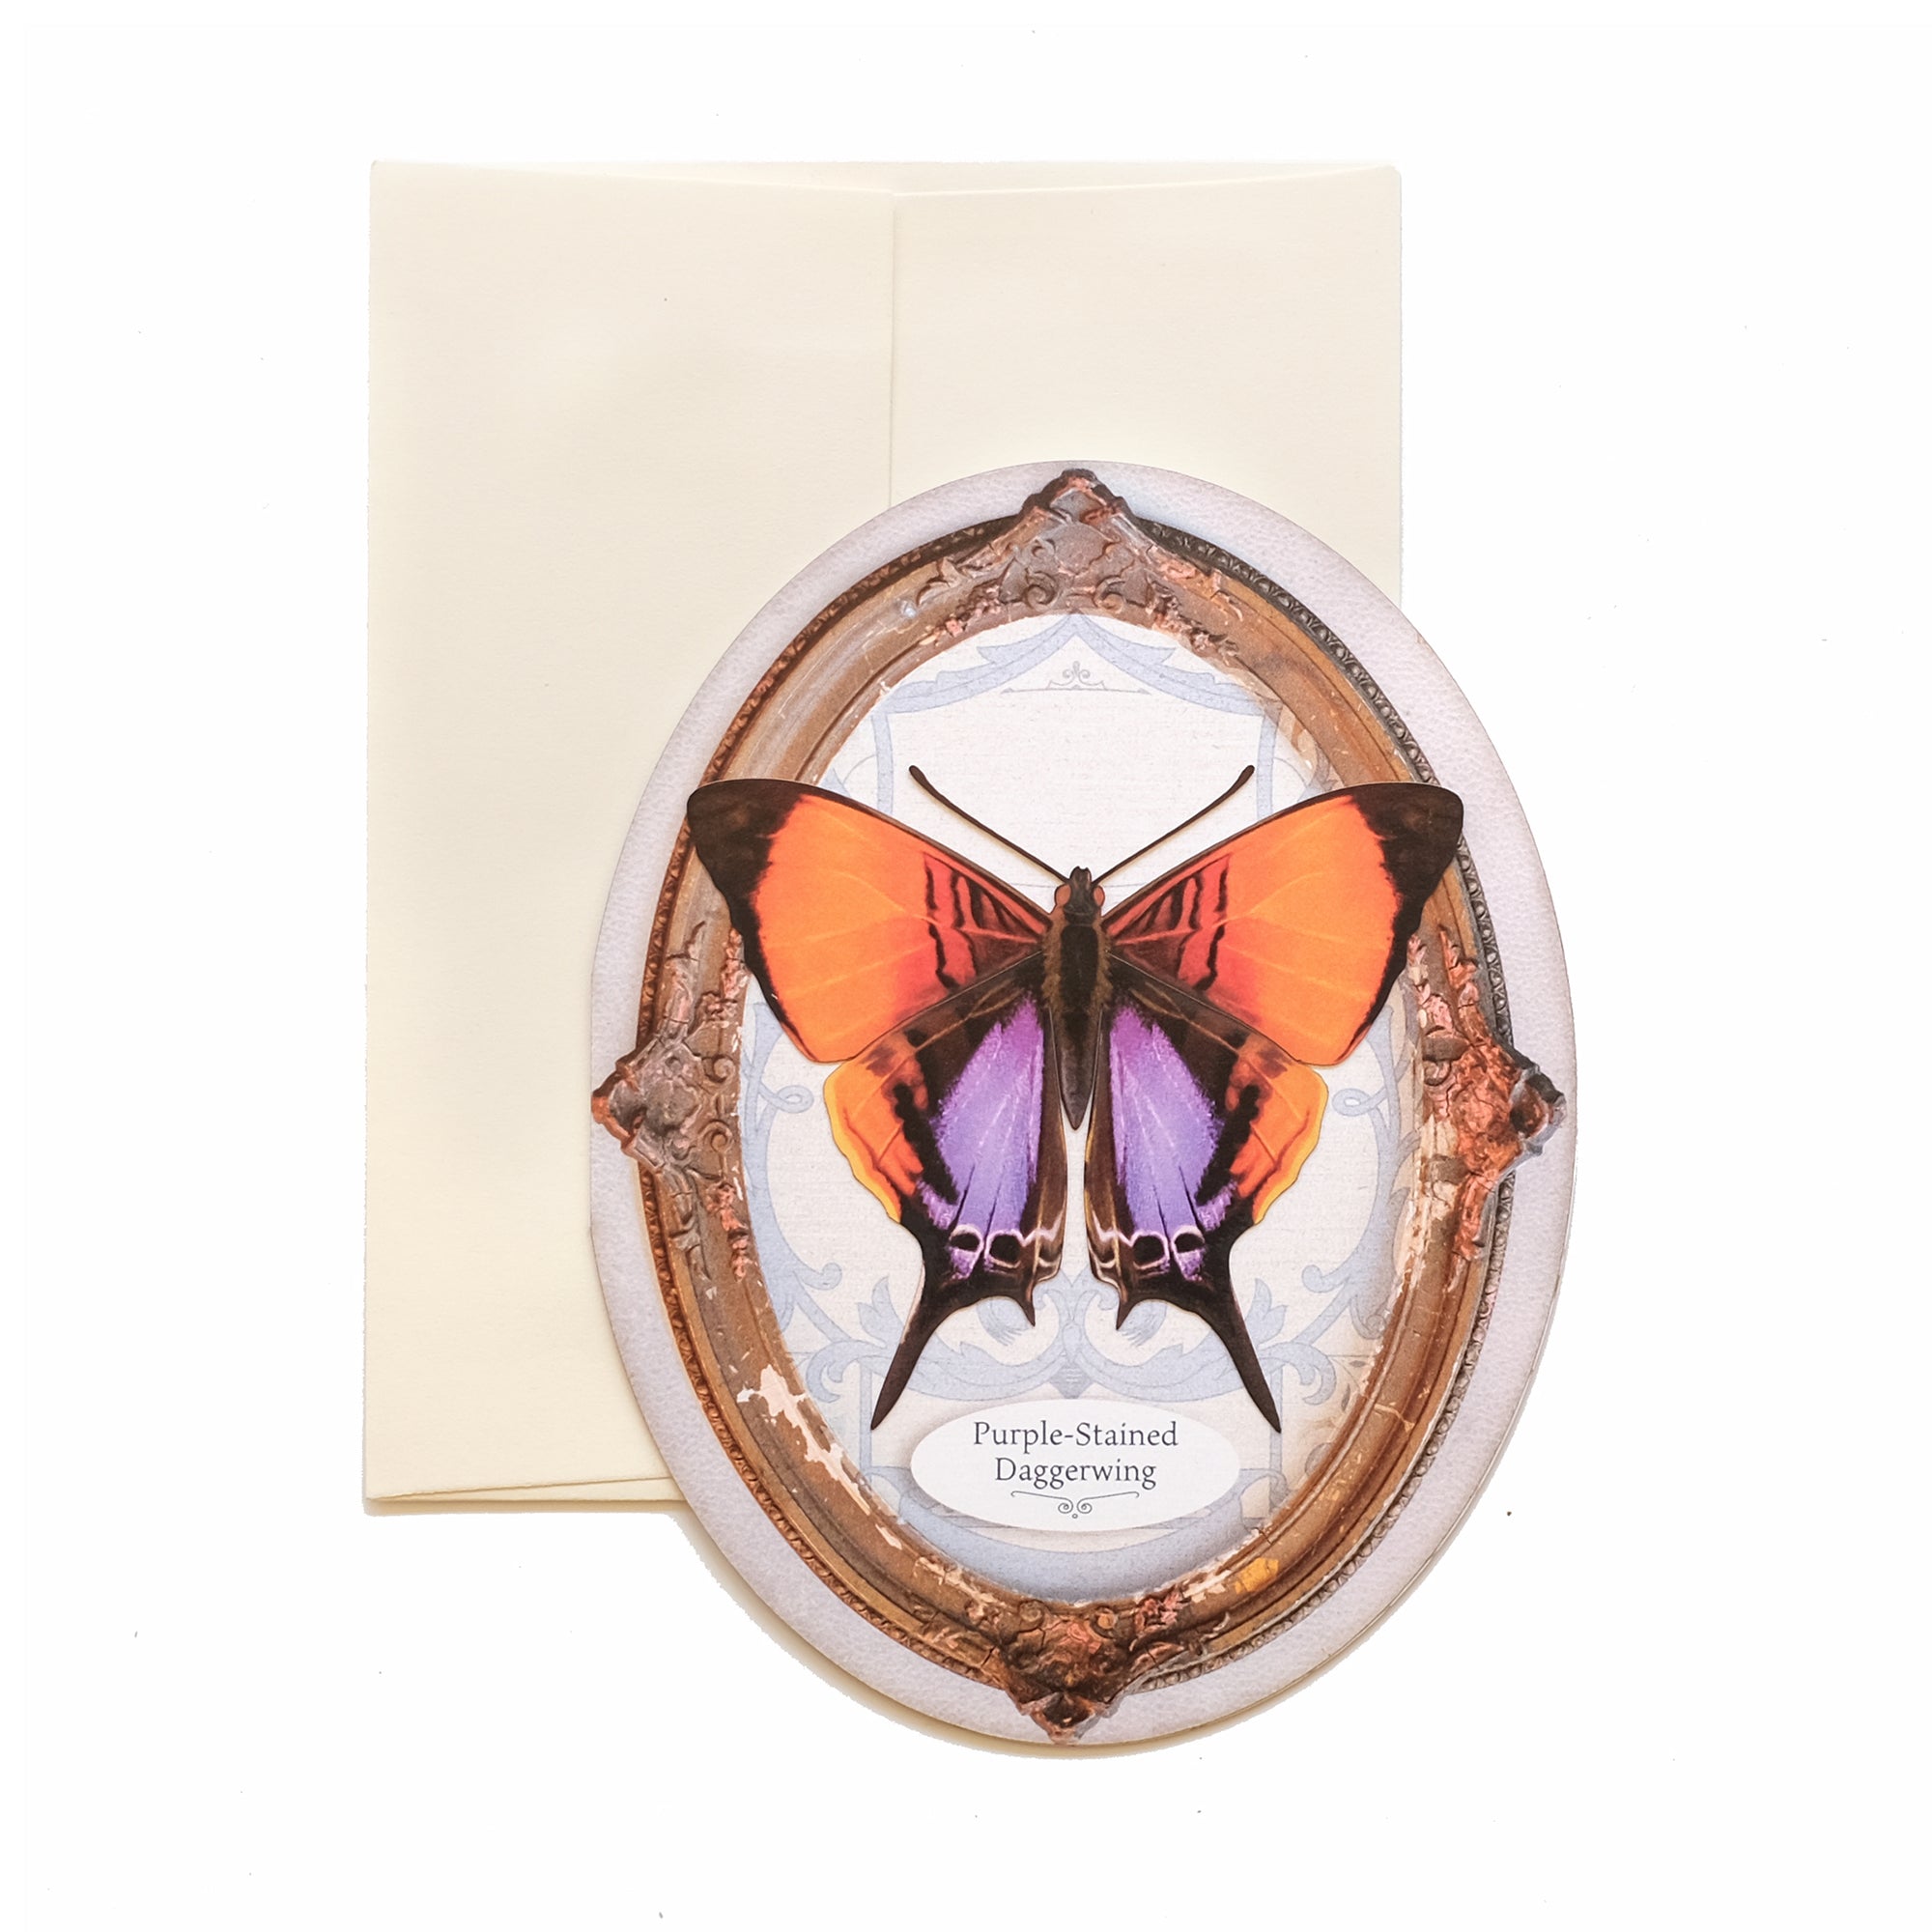 Purple-Stained Daggerwing Oval Greeting Card - Set of 4 - Reseller Wholesale